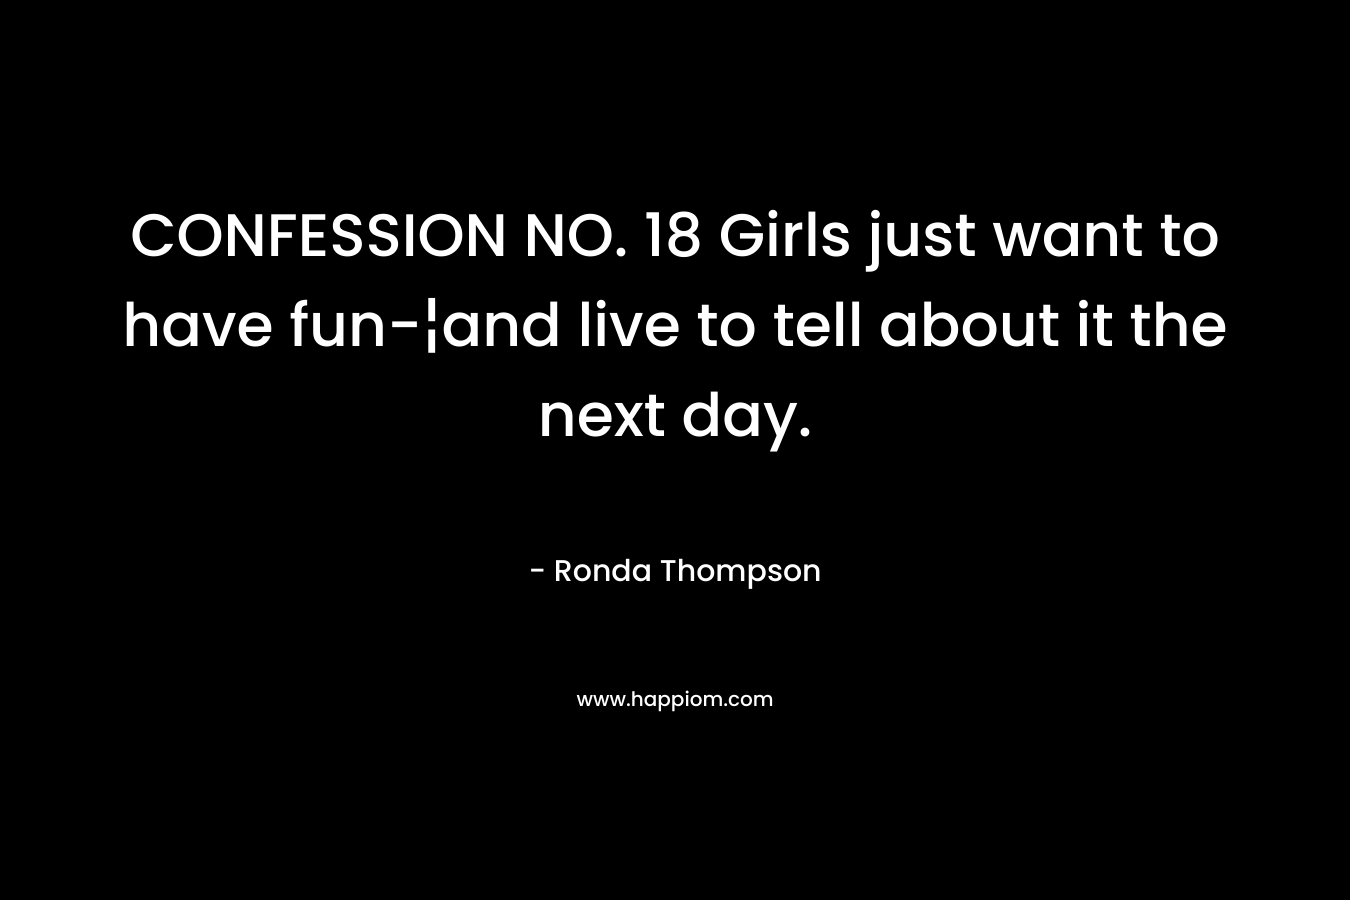 CONFESSION NO. 18 Girls just want to have fun-¦and live to tell about it the next day.